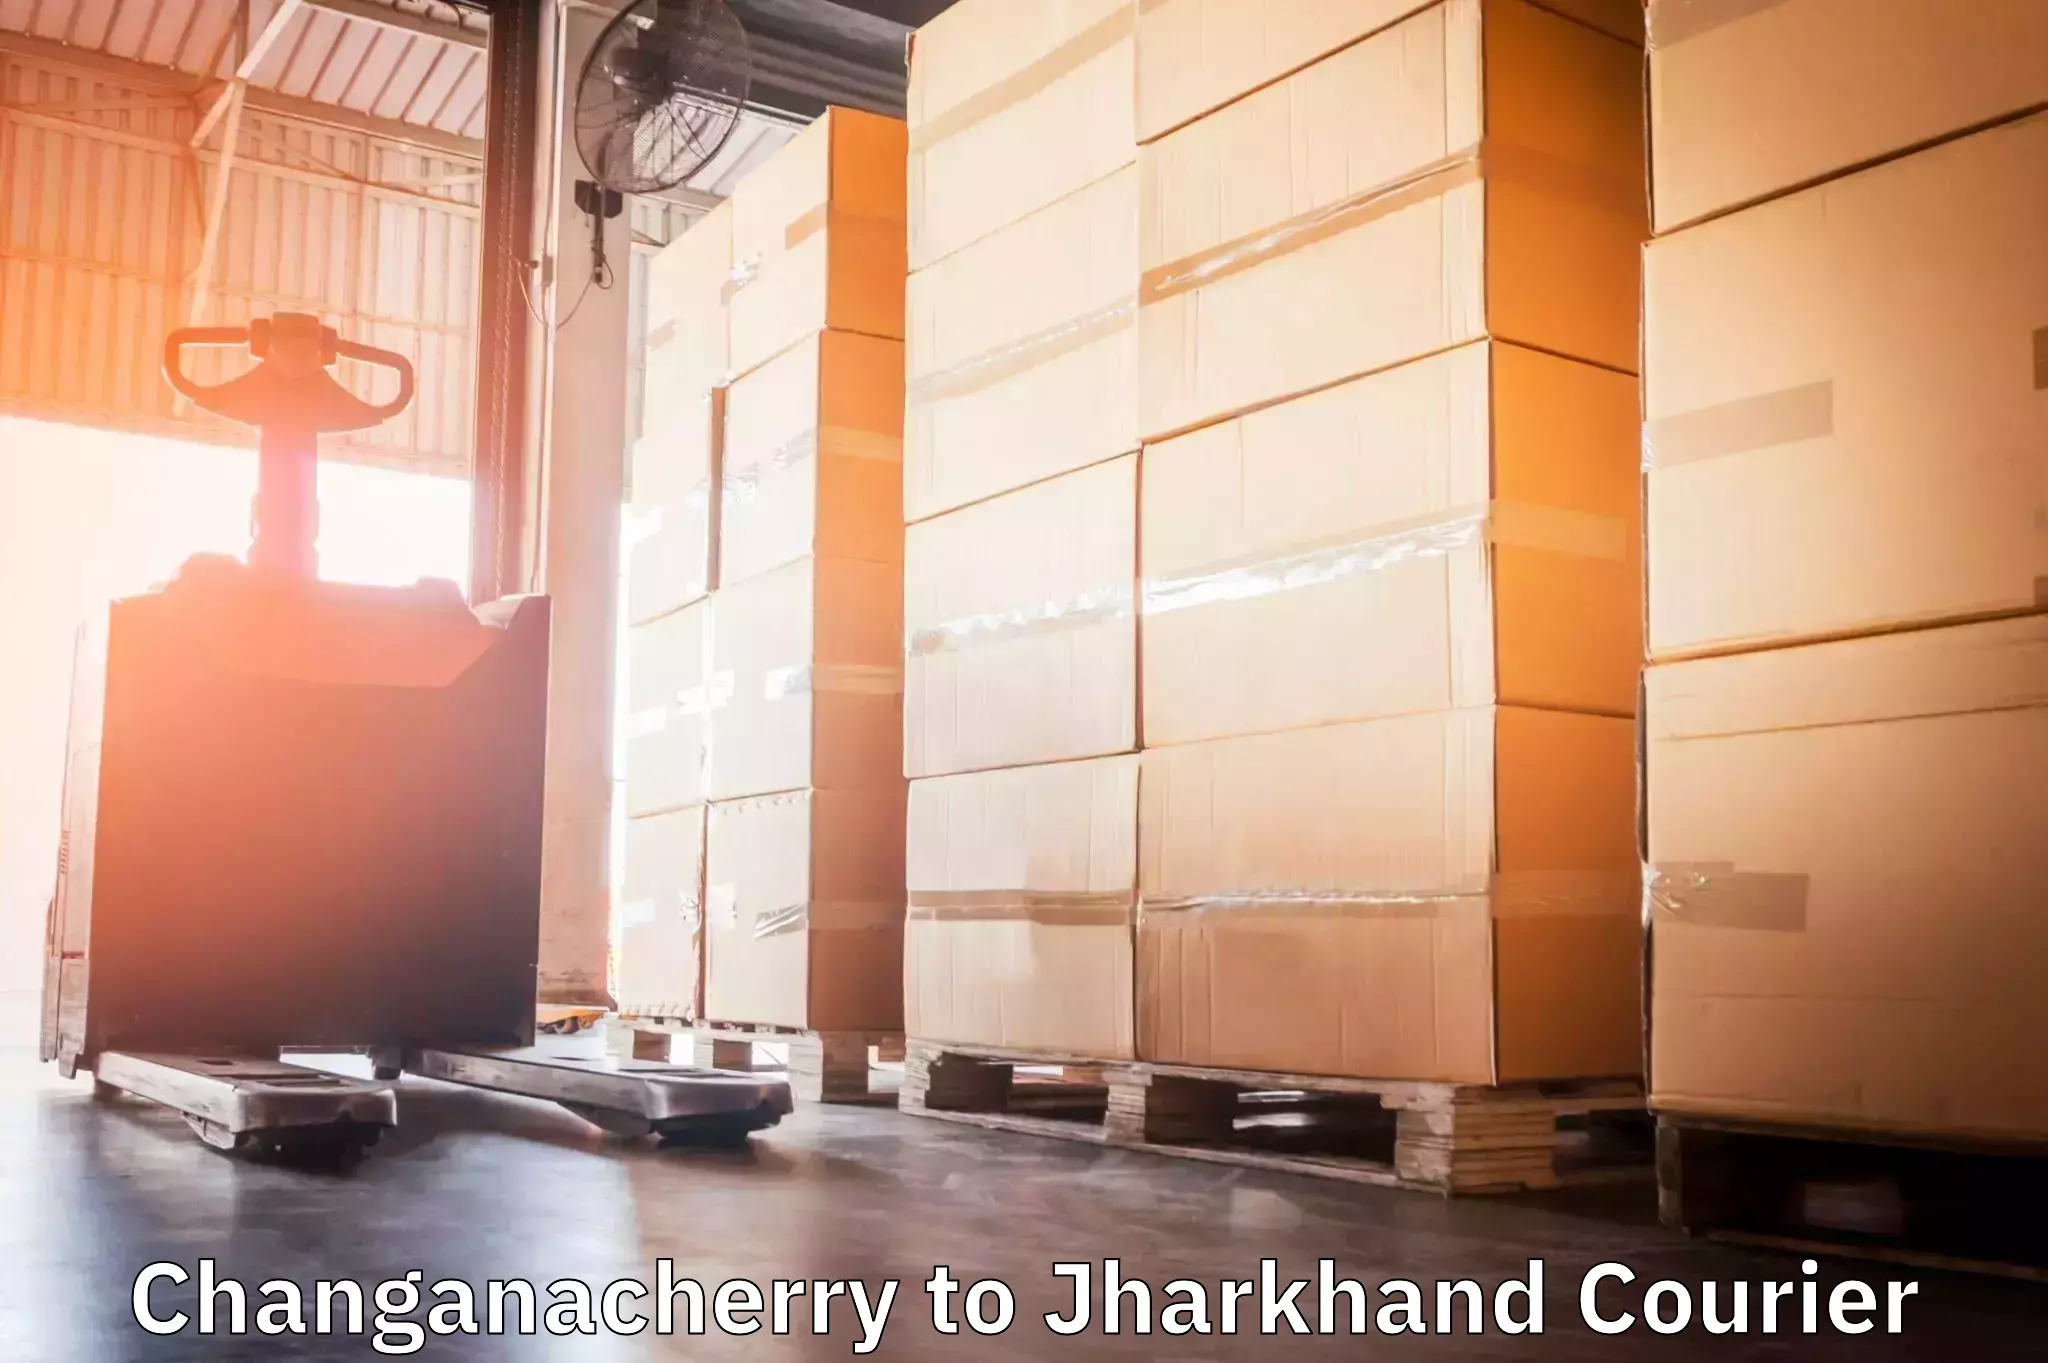 Secure freight services in Changanacherry to Latehar